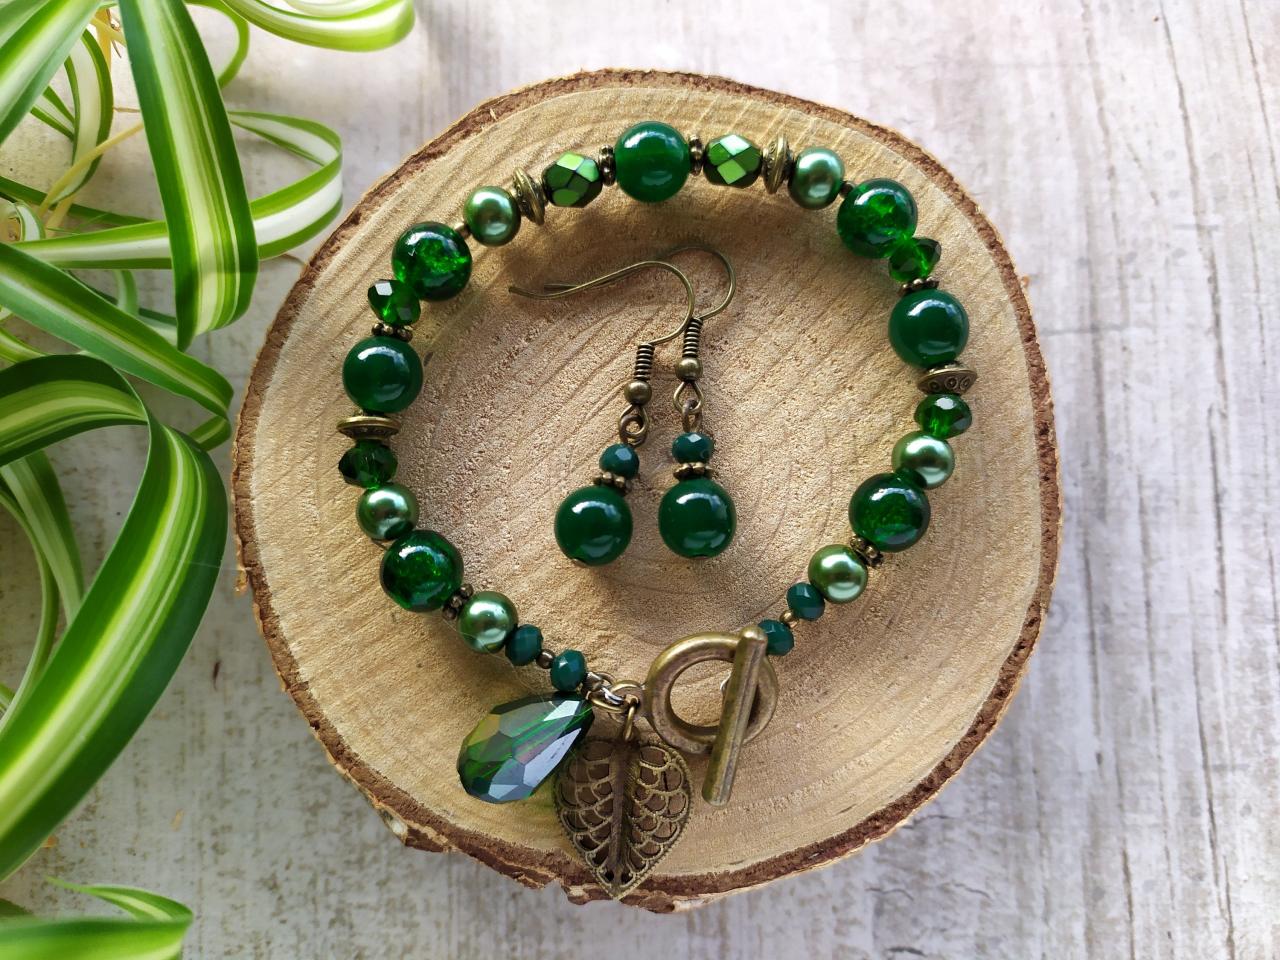 Green Bohemian Bracelet With Earrings, Green Boho Jewelry Set, Matching Dangle Earrings And Bracelet, Jewelry For Gifting, Gift For Her